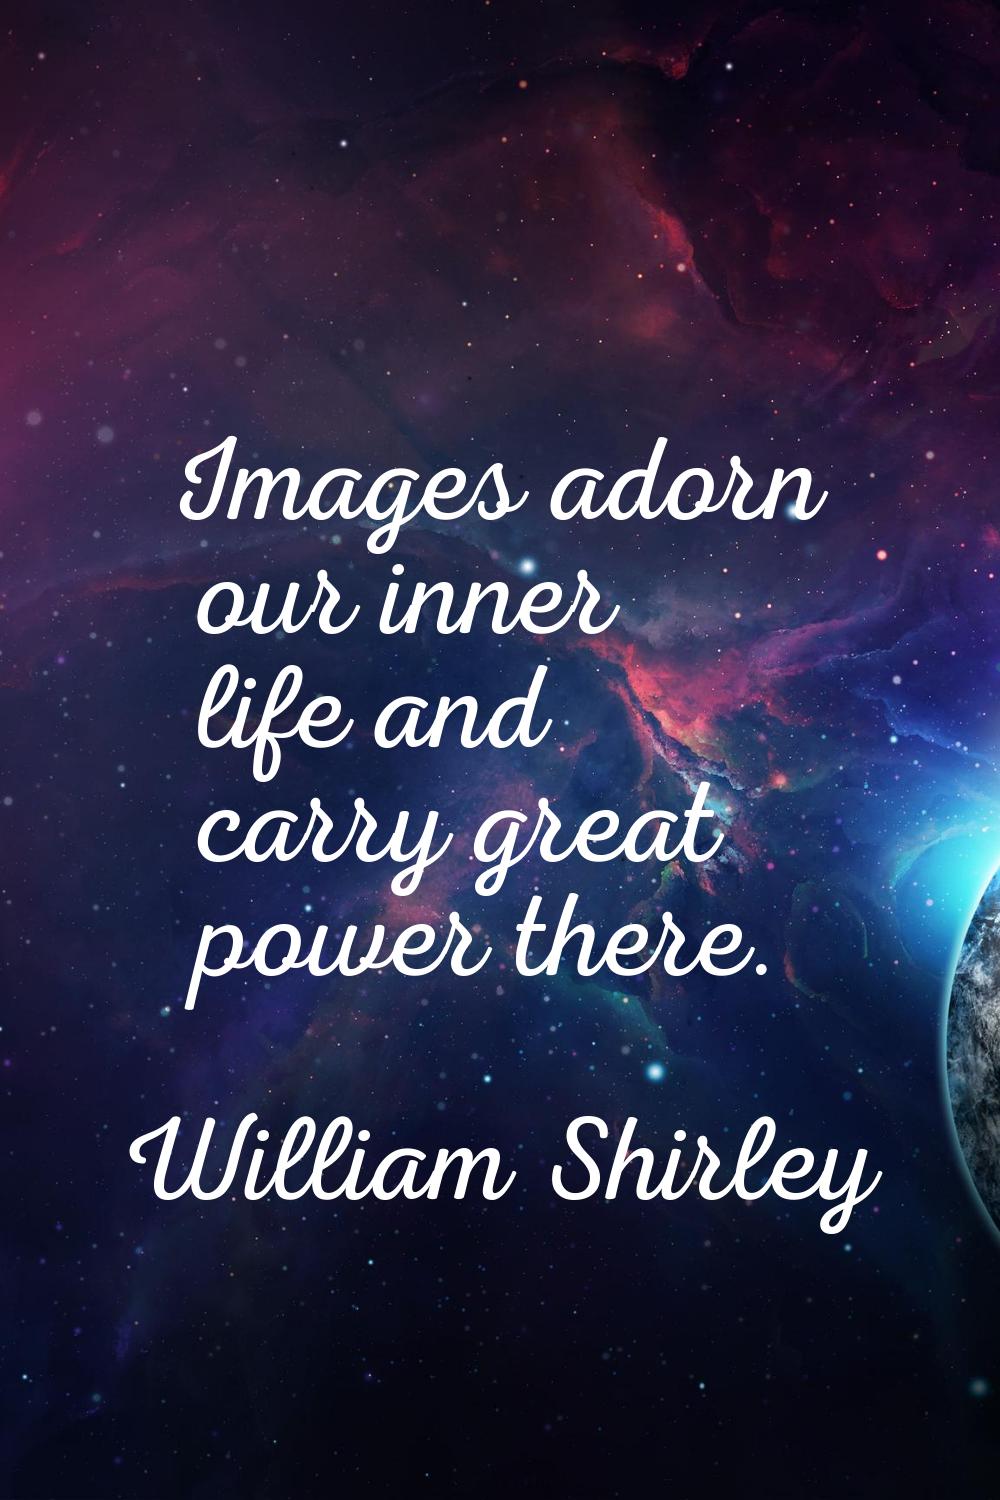 Images adorn our inner life and carry great power there.